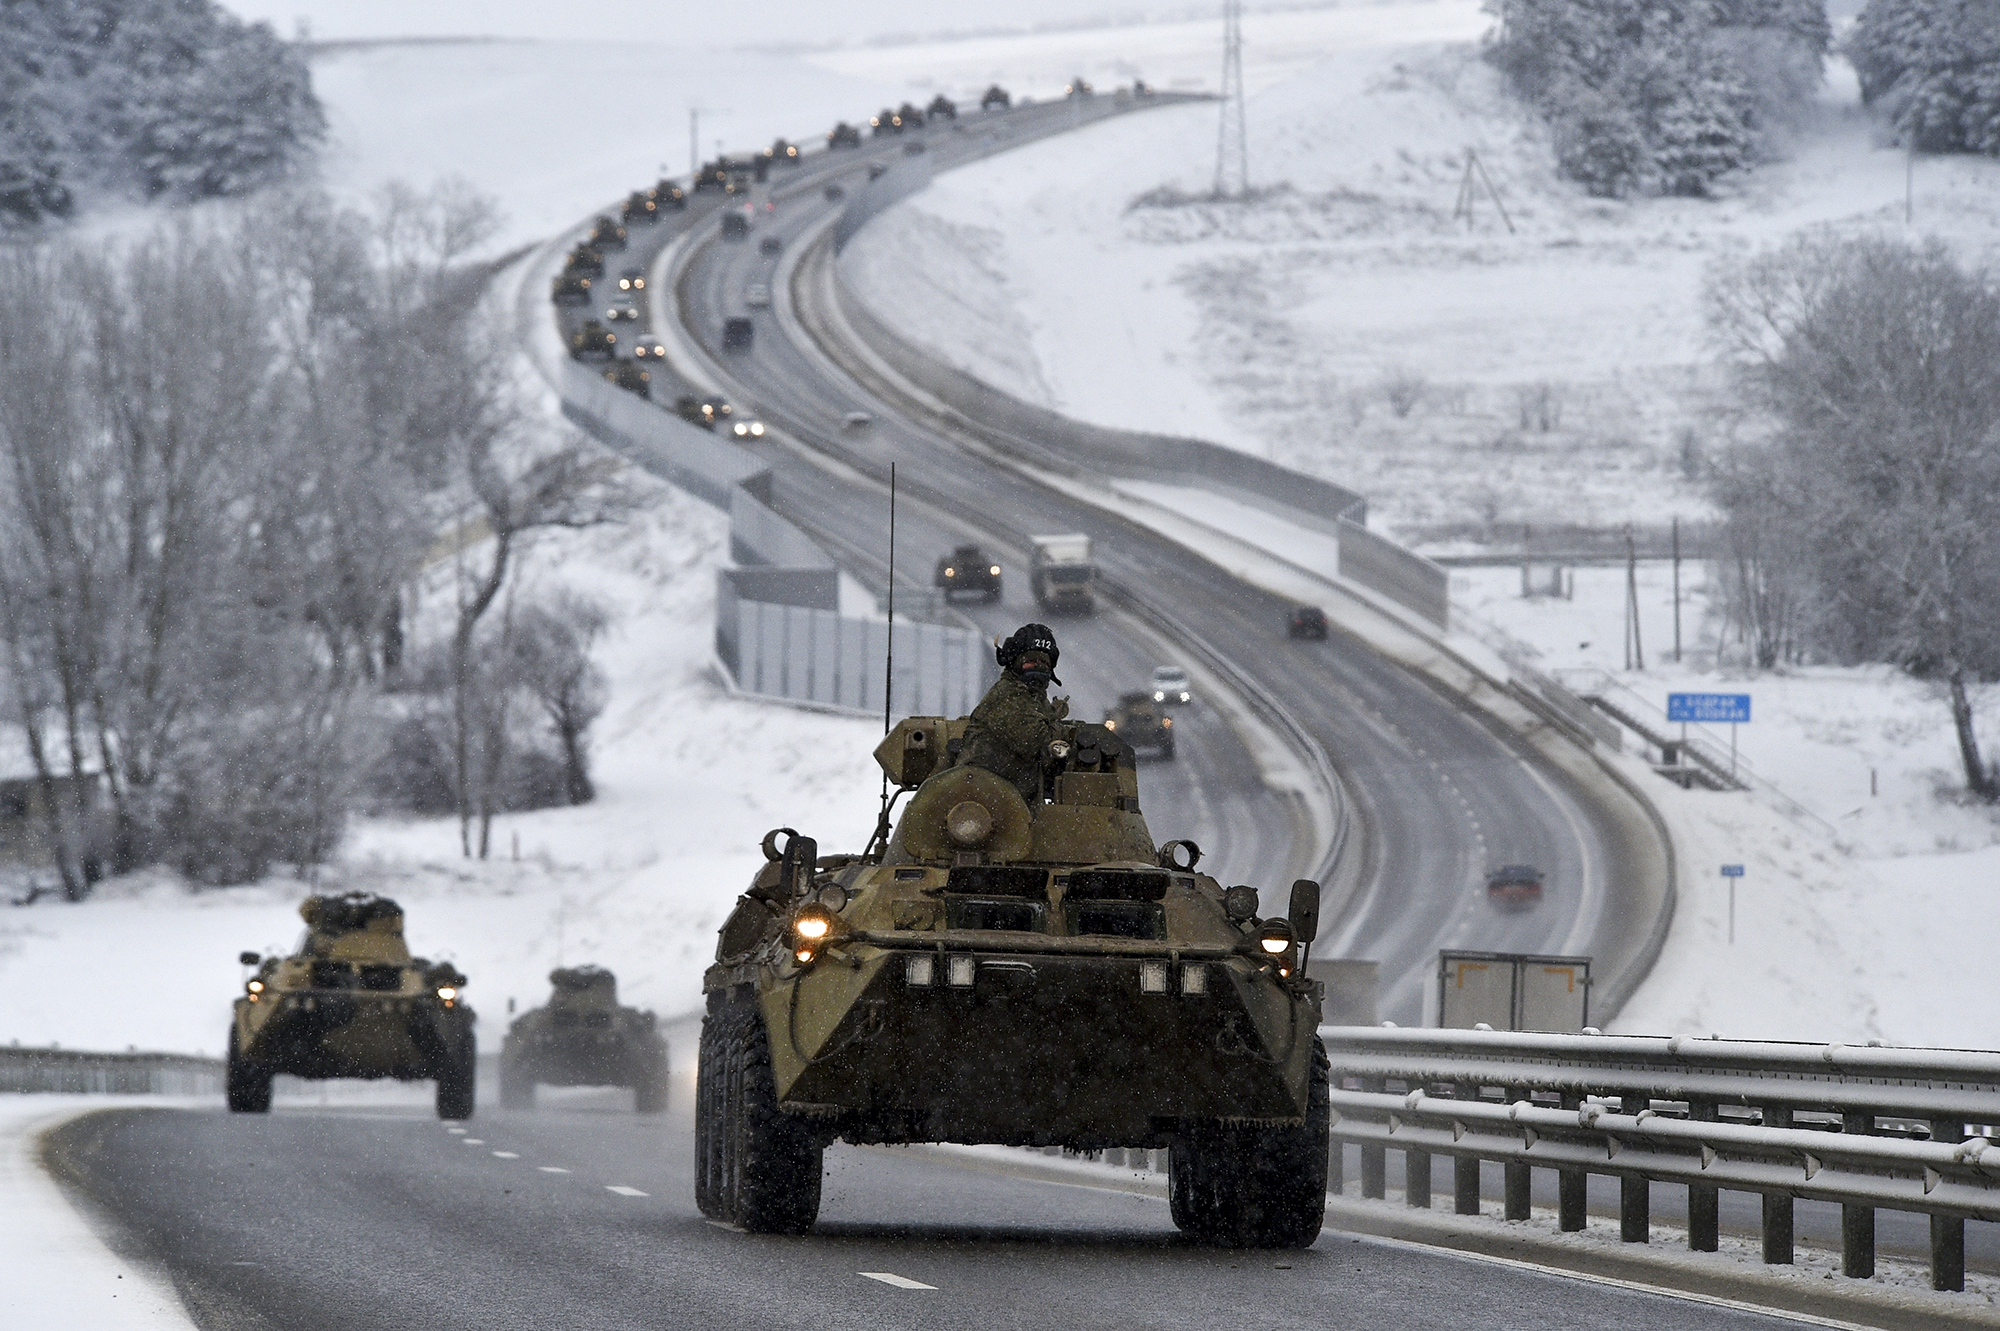 A convoy of Russian armored vehicles moves along a highway in Crimea, Russia on Tuesday, January 18